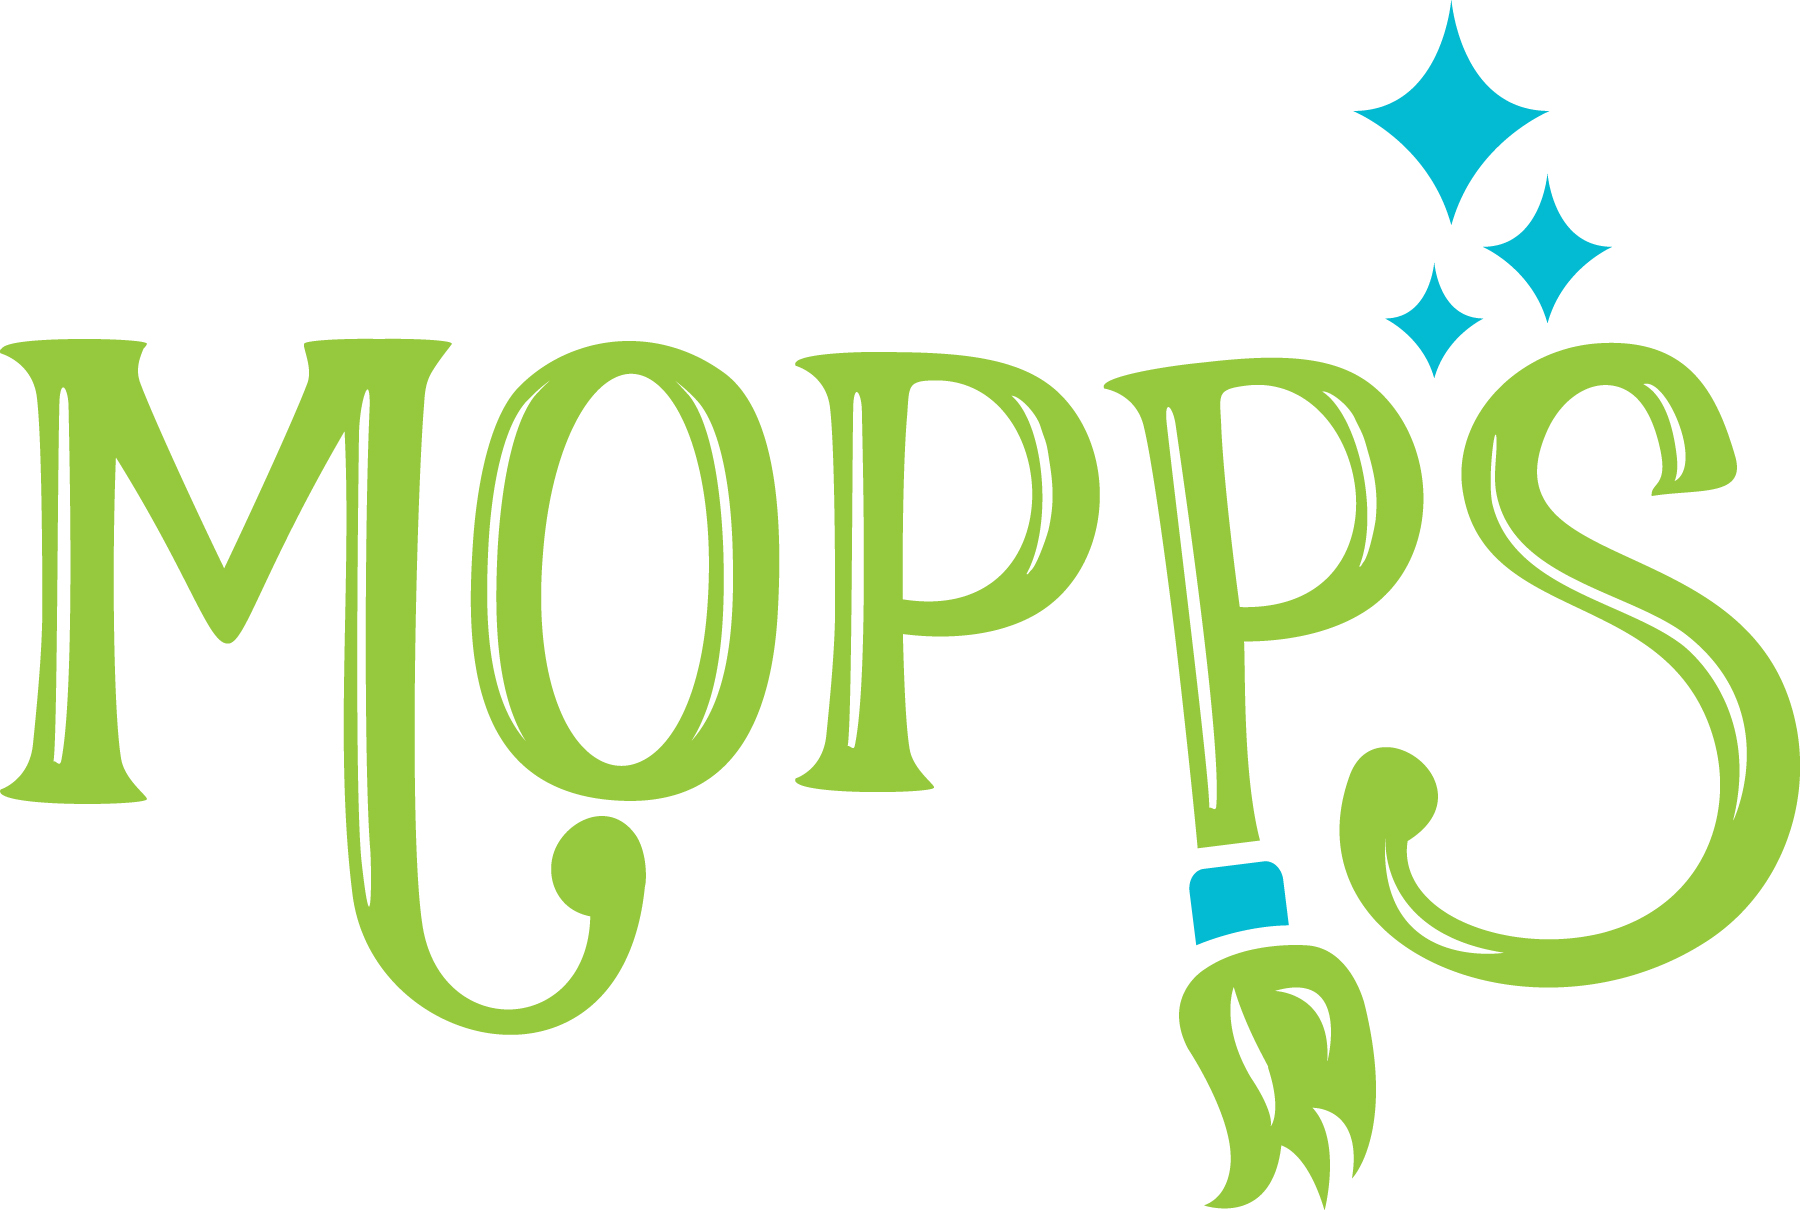 MOPPS Cleaning Company has 4.9 stars on SoTellUs